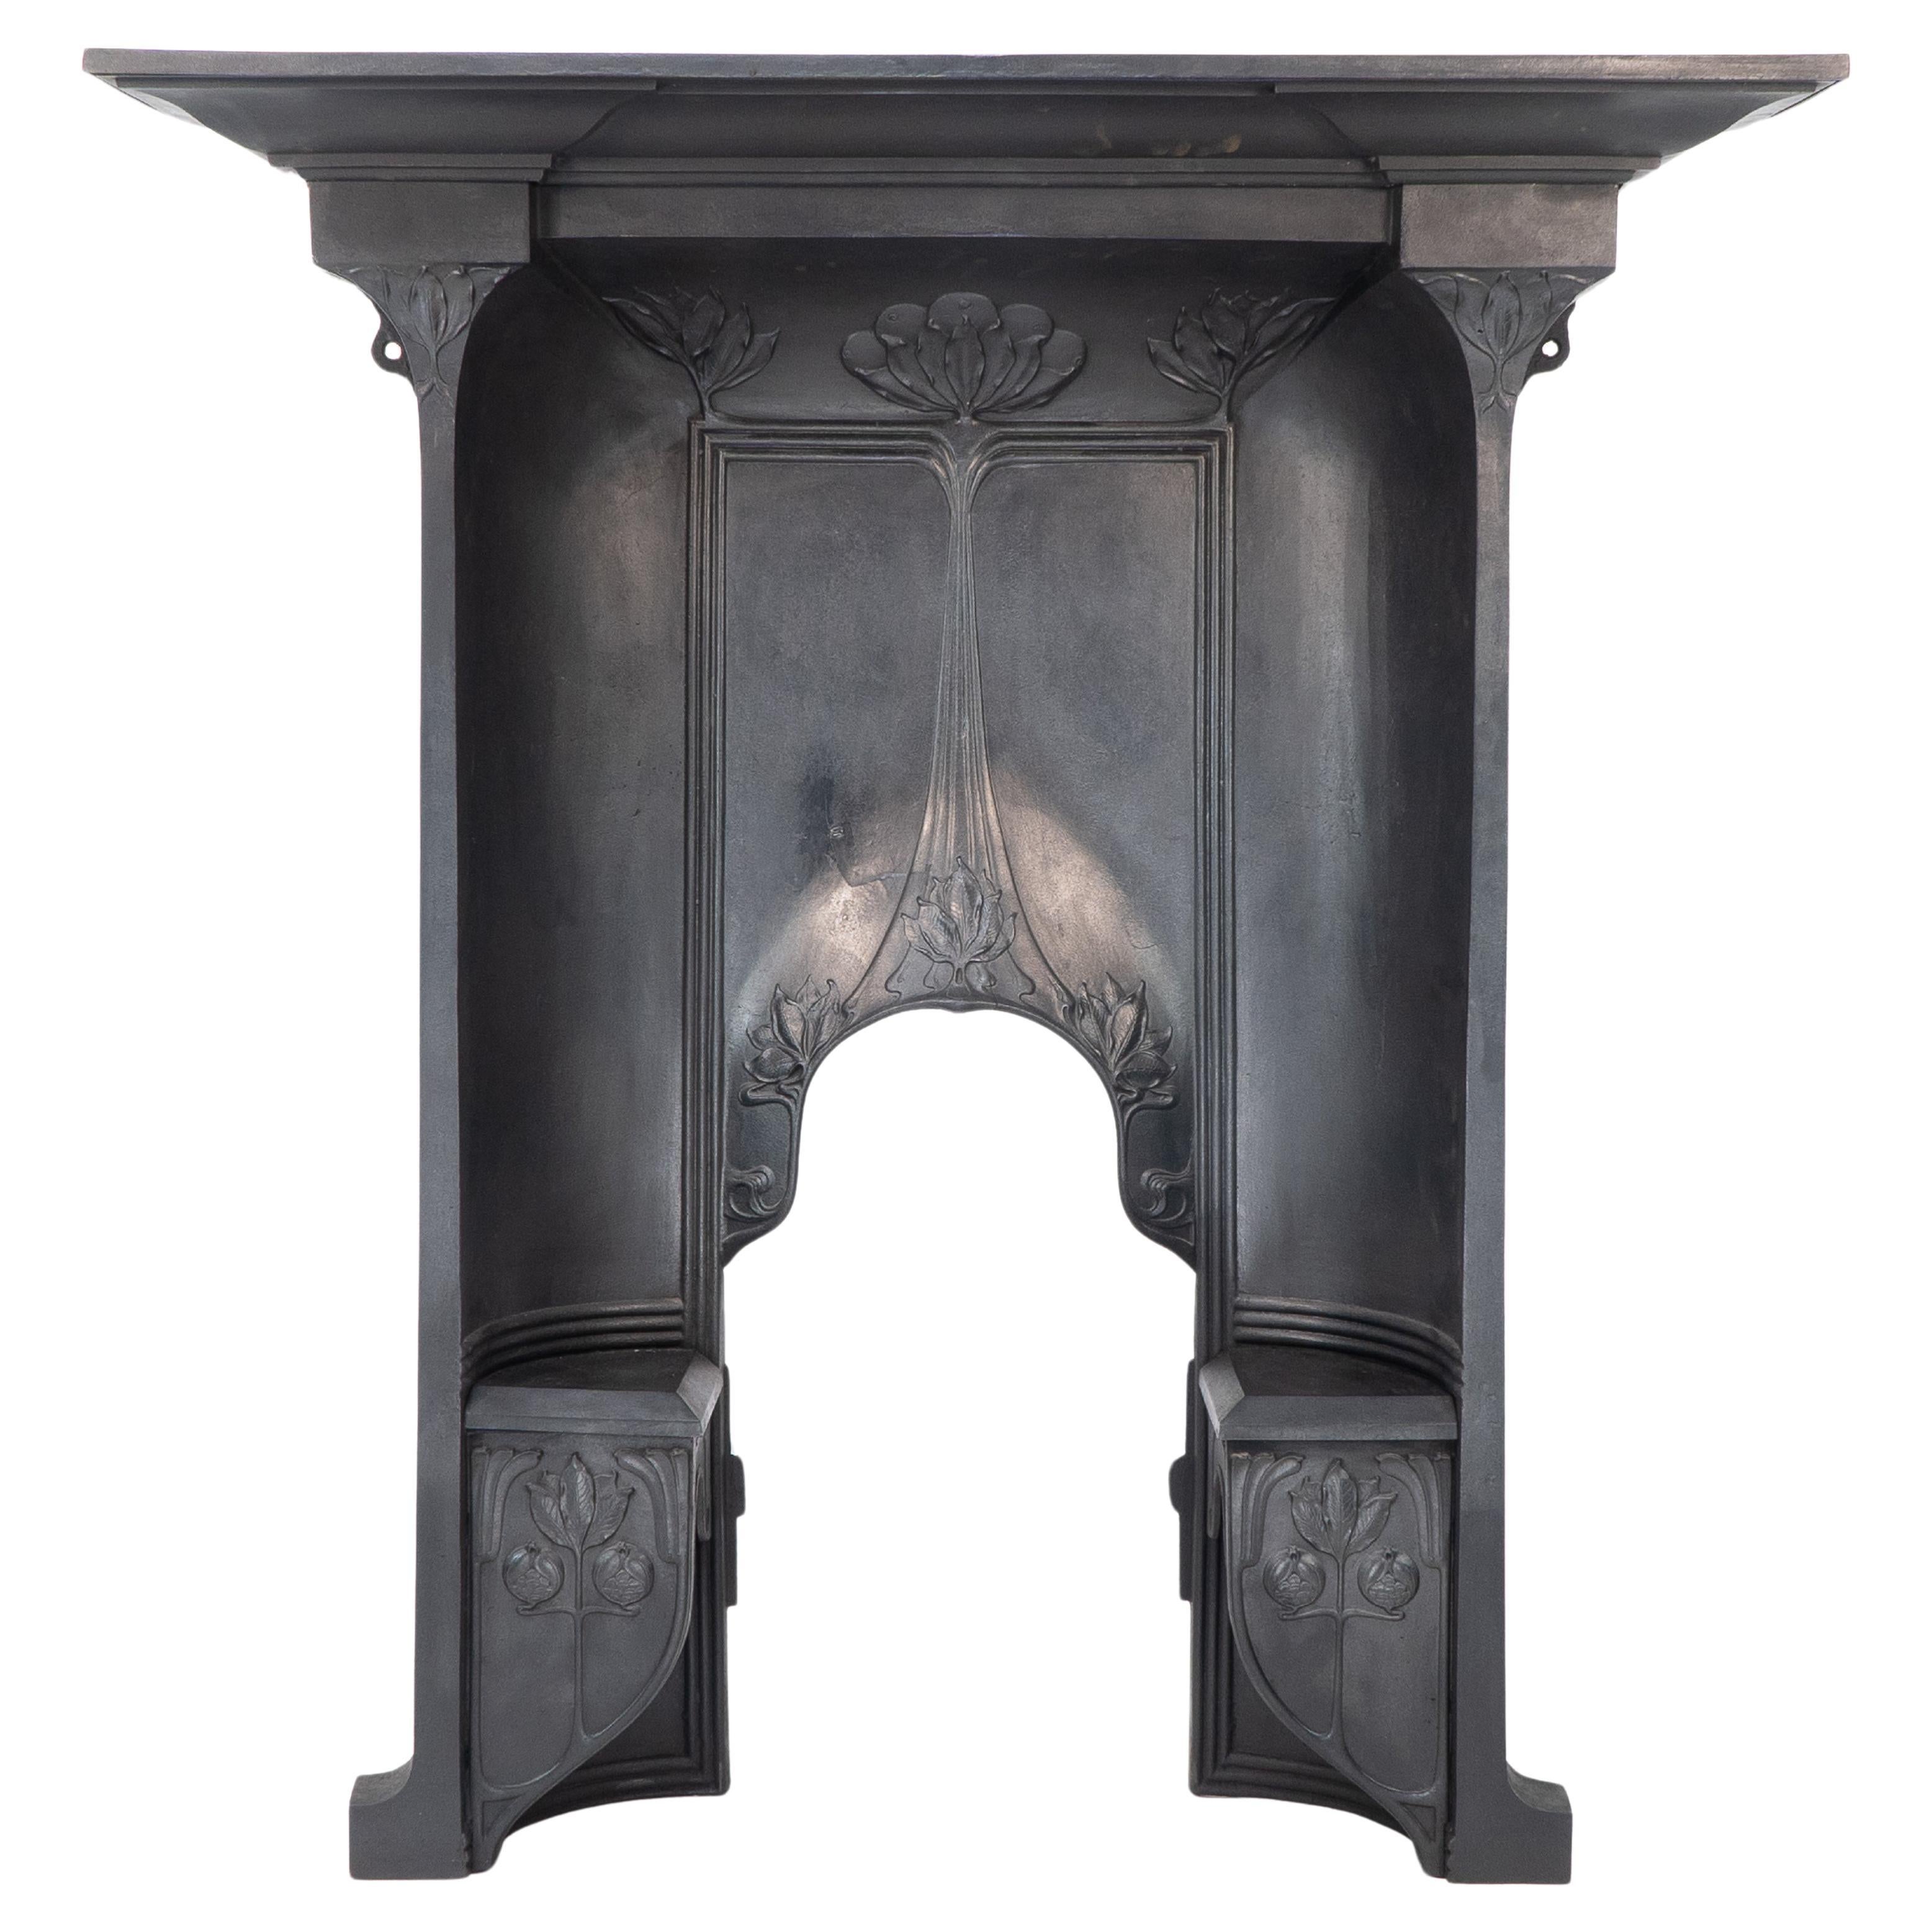 Arts & Crafts cast iron fireplace with curved sides & stylized floral decoration